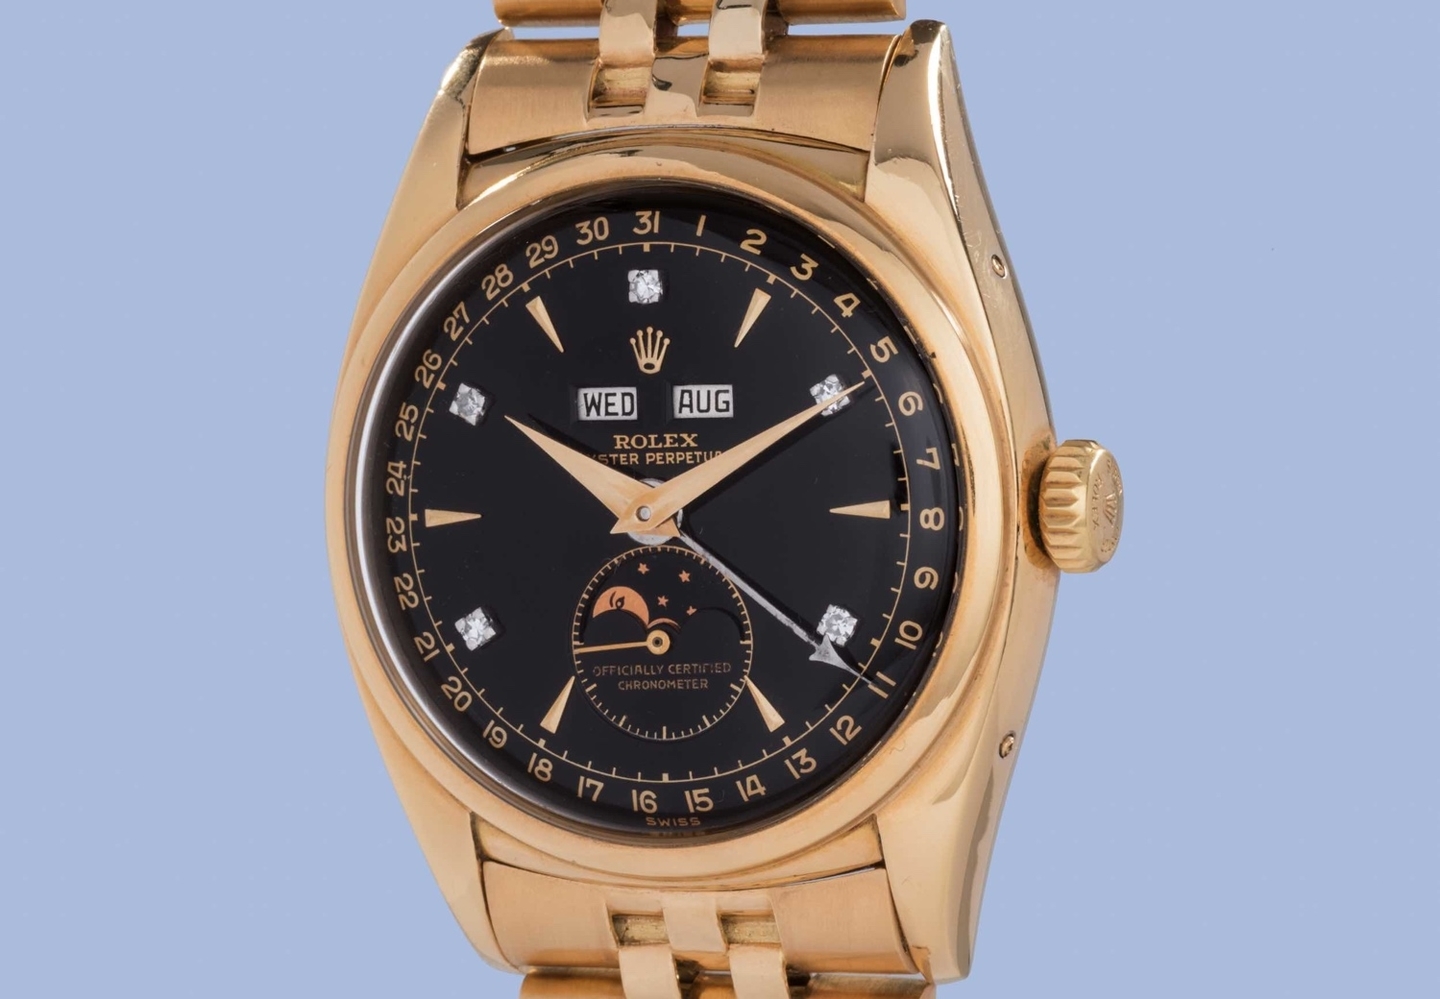 Most expensive Rolex ever sold at auction